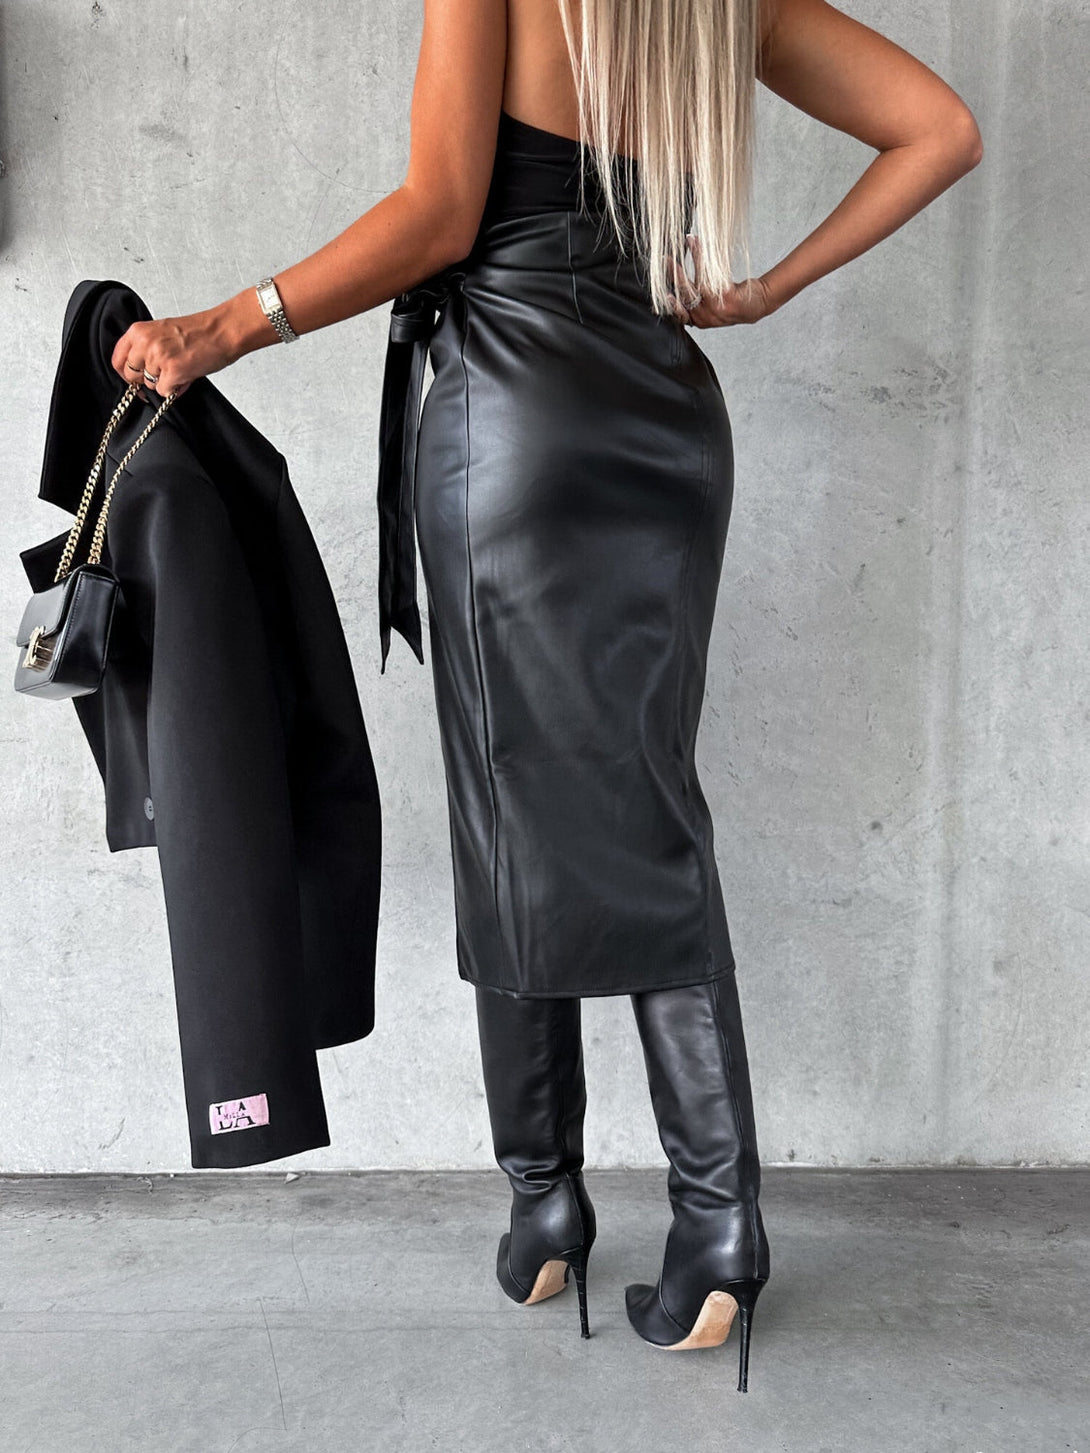 It's Not That Easy Tied High Waist Skirt Black Faux Leather Tied High Waist Skirt by Vim&Vigor | Vim&Vigor Boutique